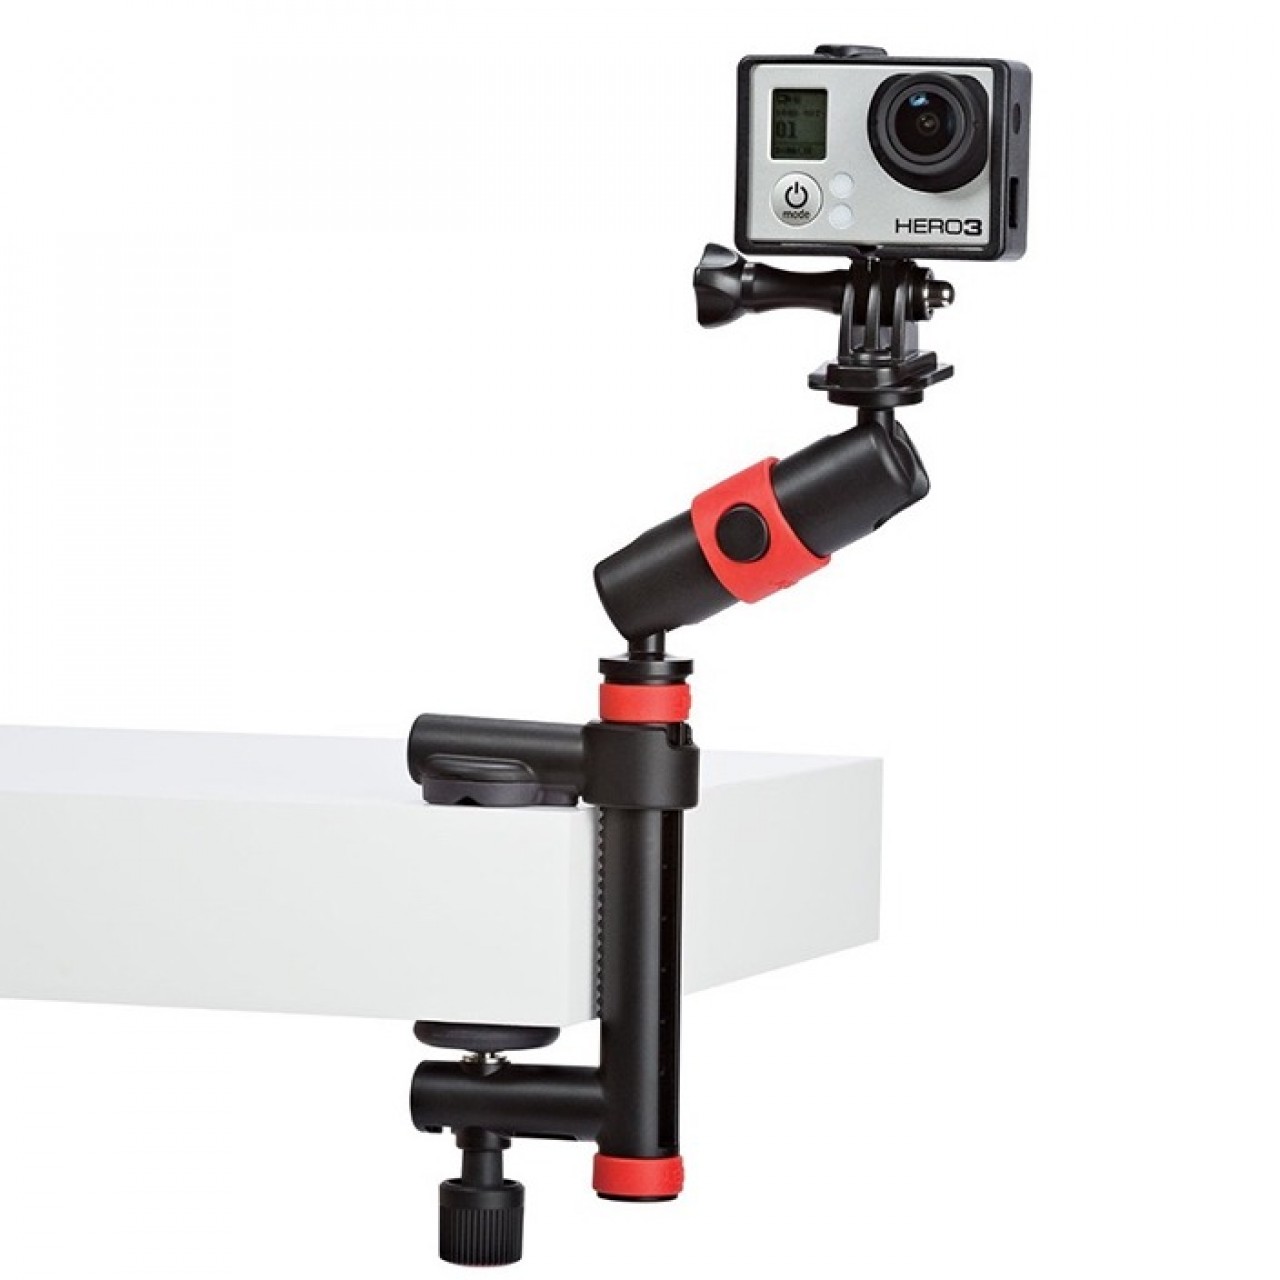 Multi-Function Action Clamp & Locking Arm For Sports Action Cameras